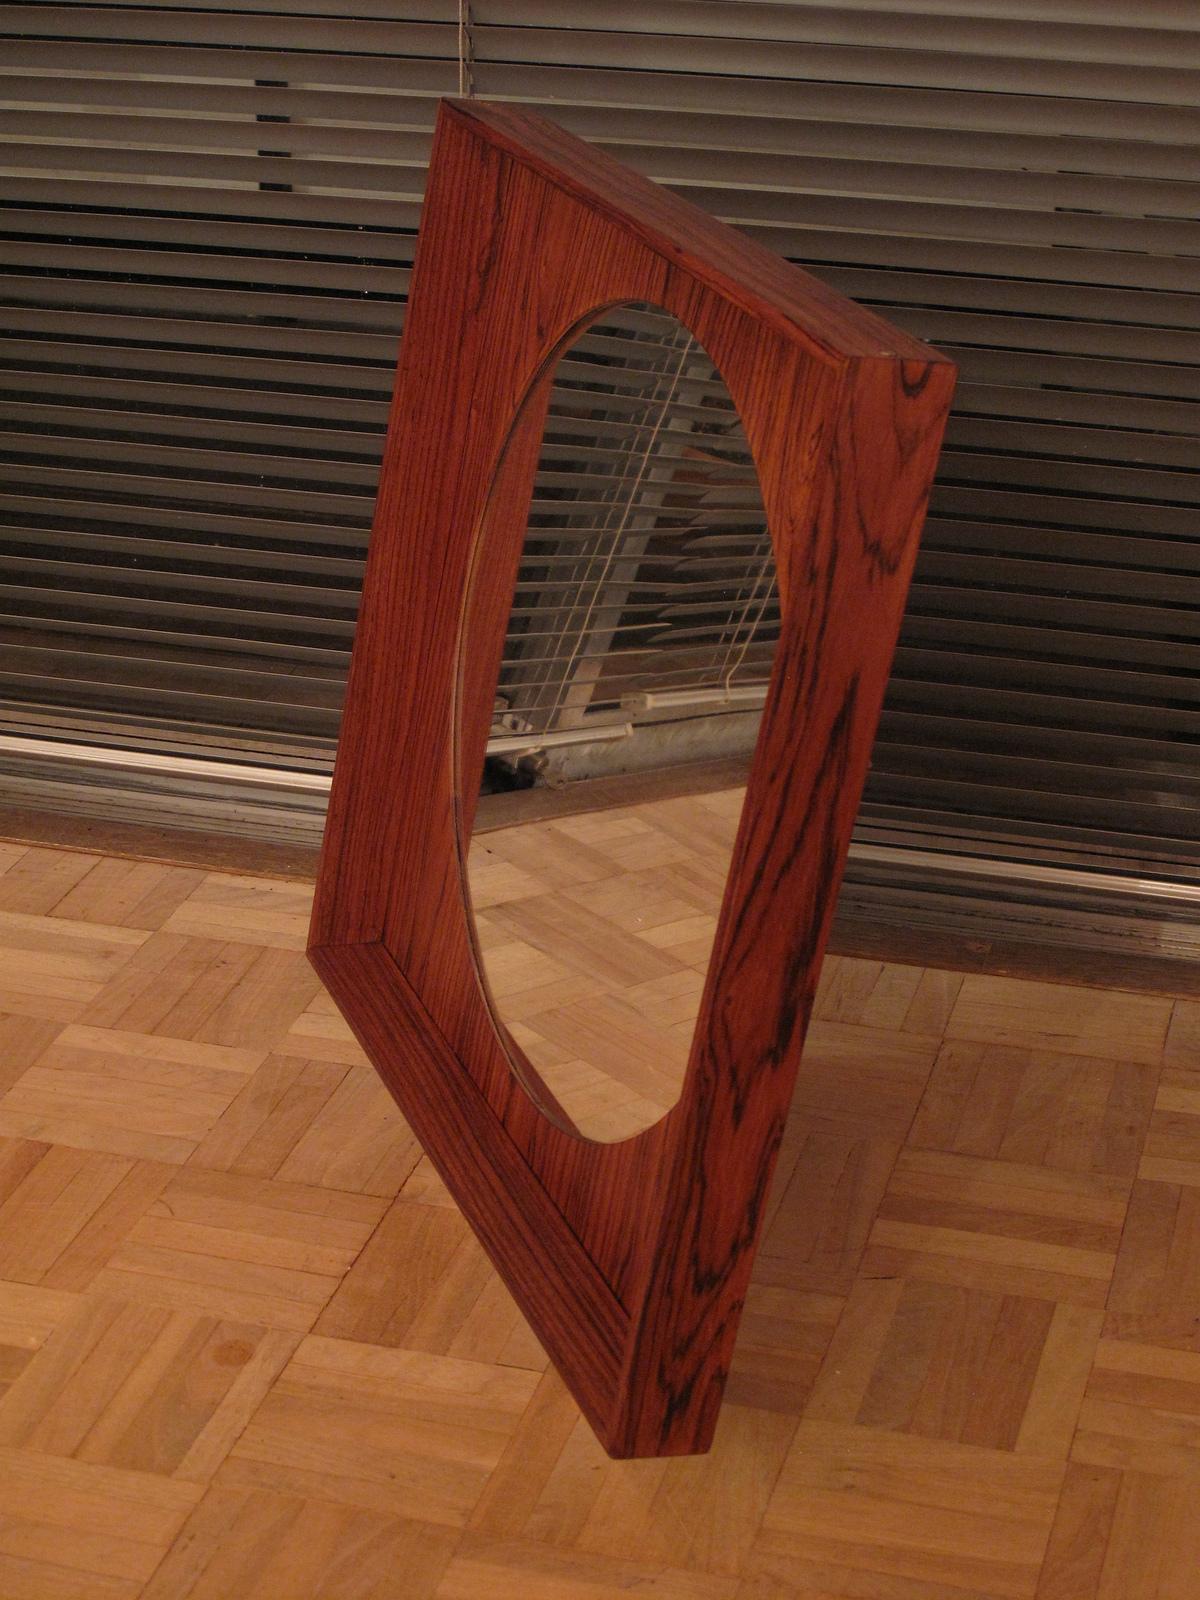 An unusual square framed wall mirror finished in Brazilian rosewood with an attractive beveled edge and circular glass.

Produced to a very high standard by Pedersen & Hansen of Denmark. We have not seen another example like this, it appears to be